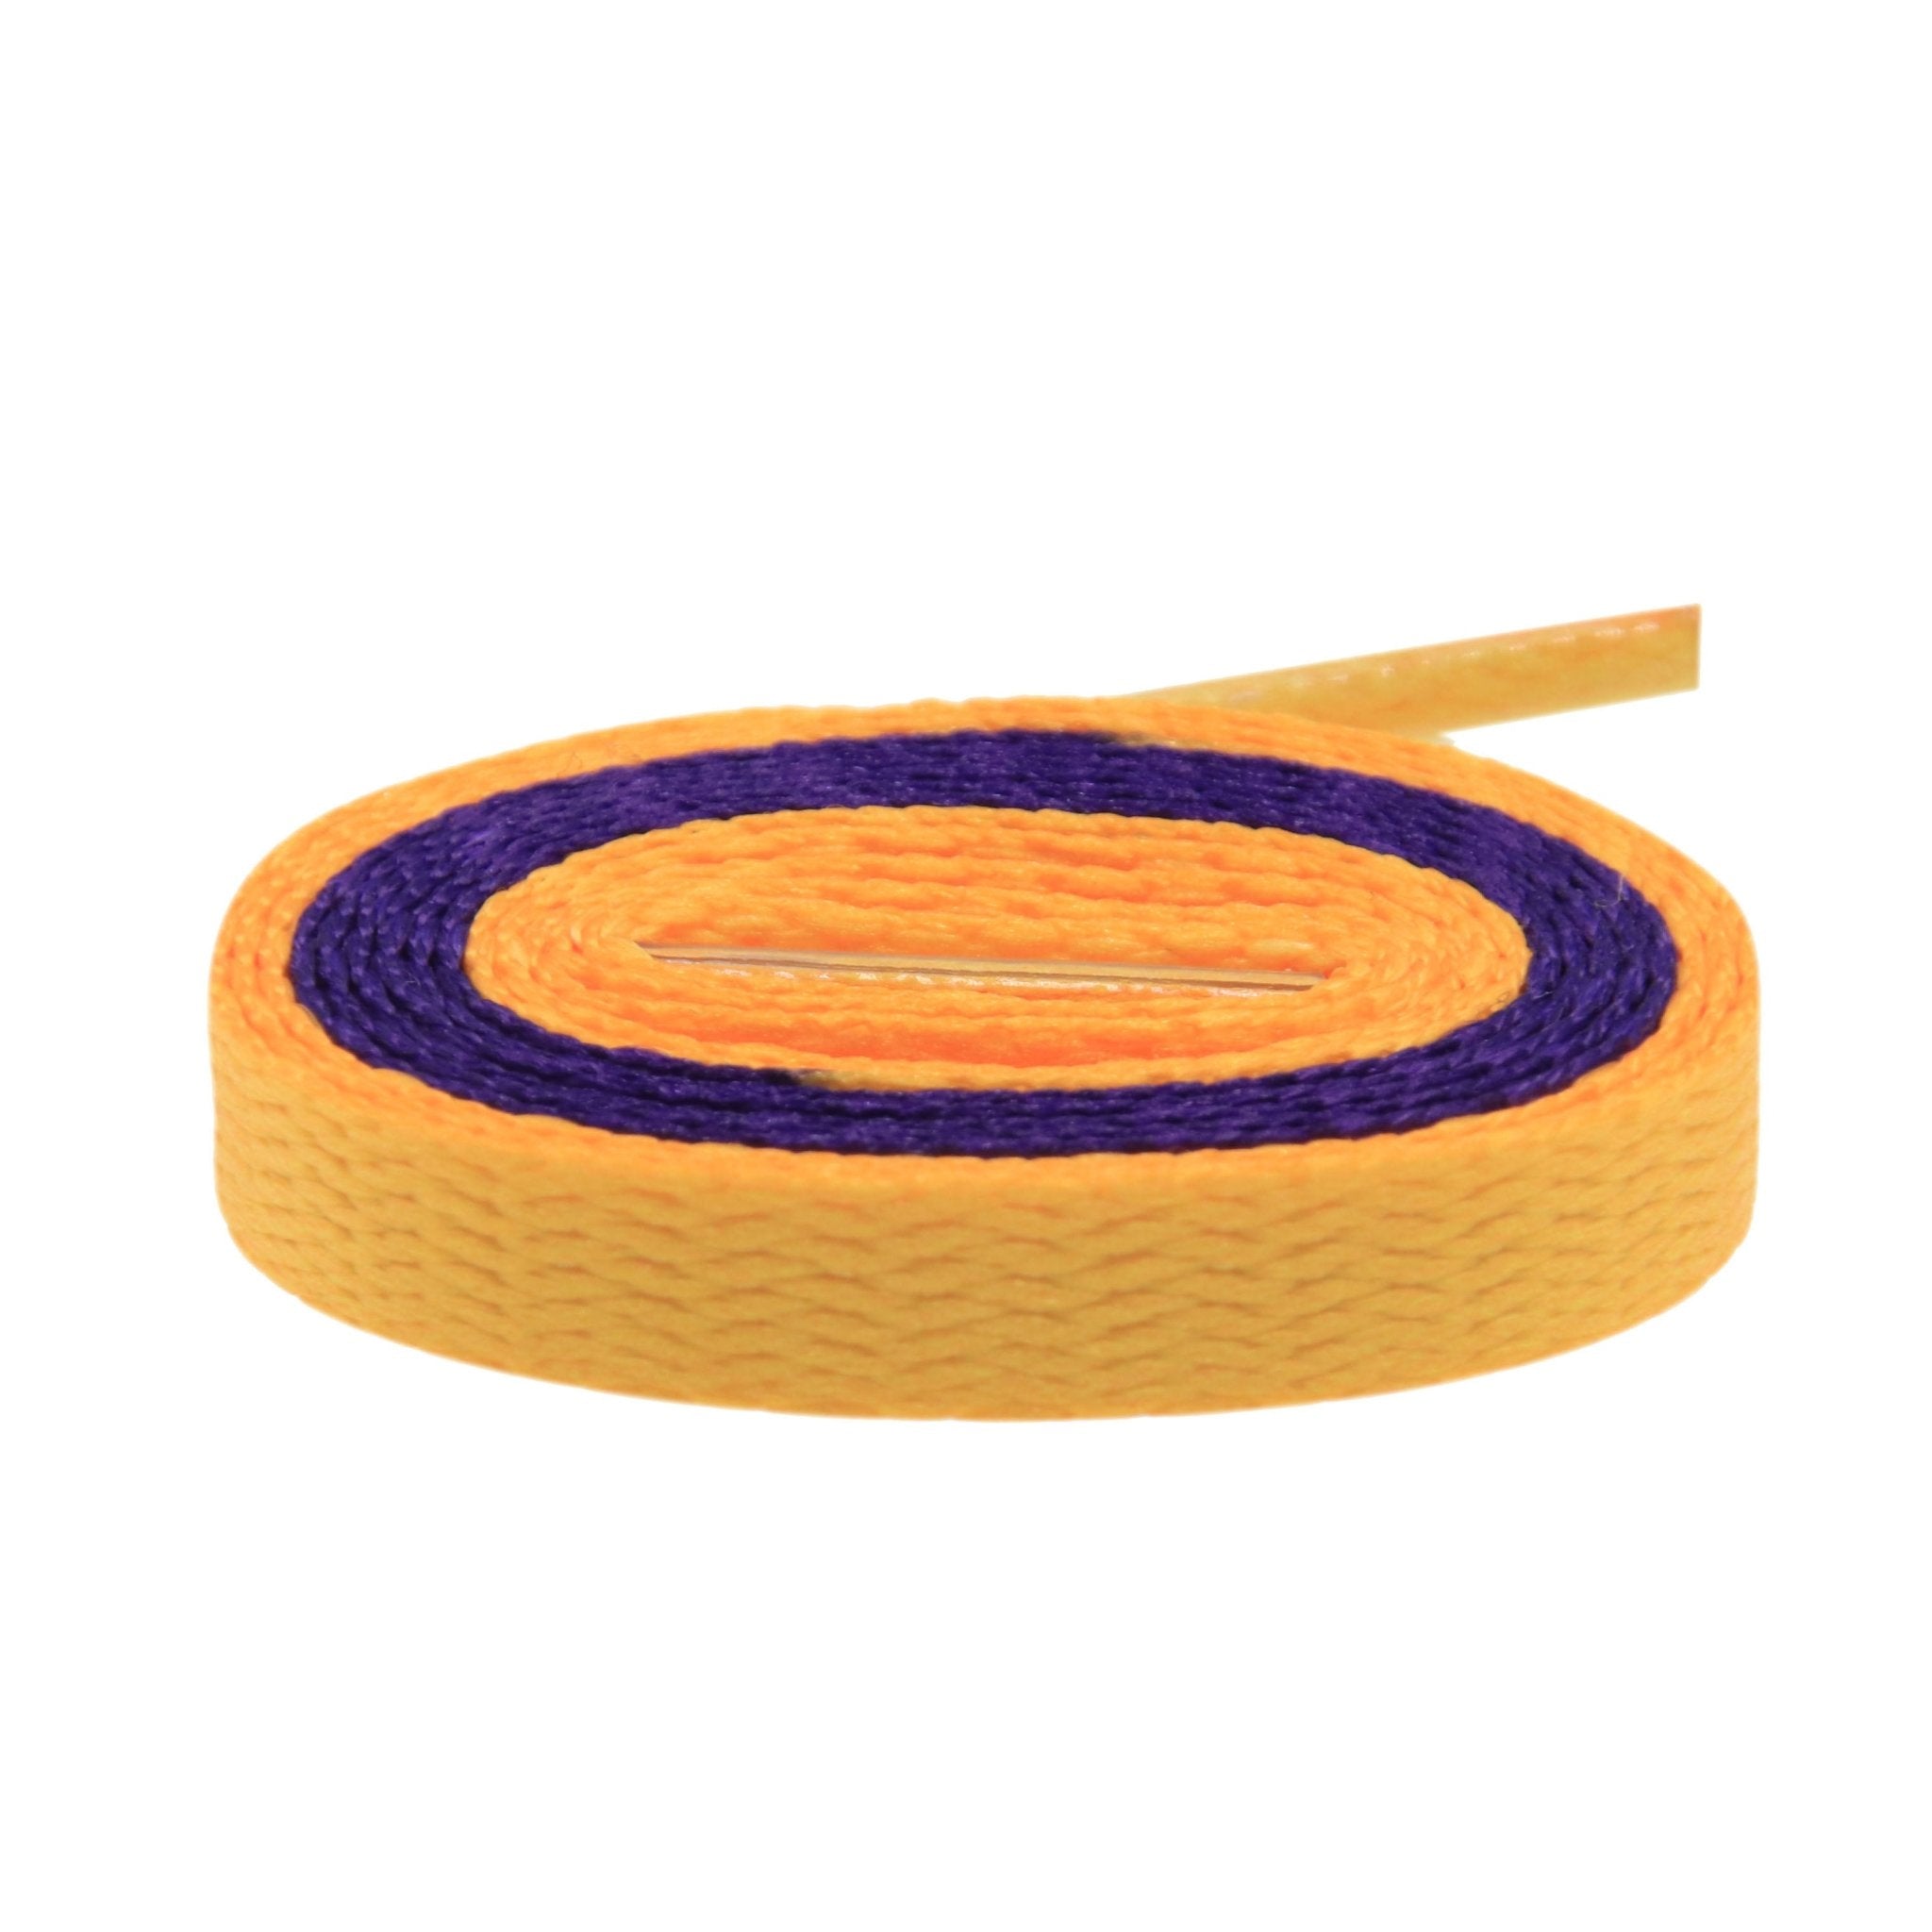 Air Jordan Laces - Two Tone - Purple/Gold Lakers Inspired - Flat Laces - LaceSpace